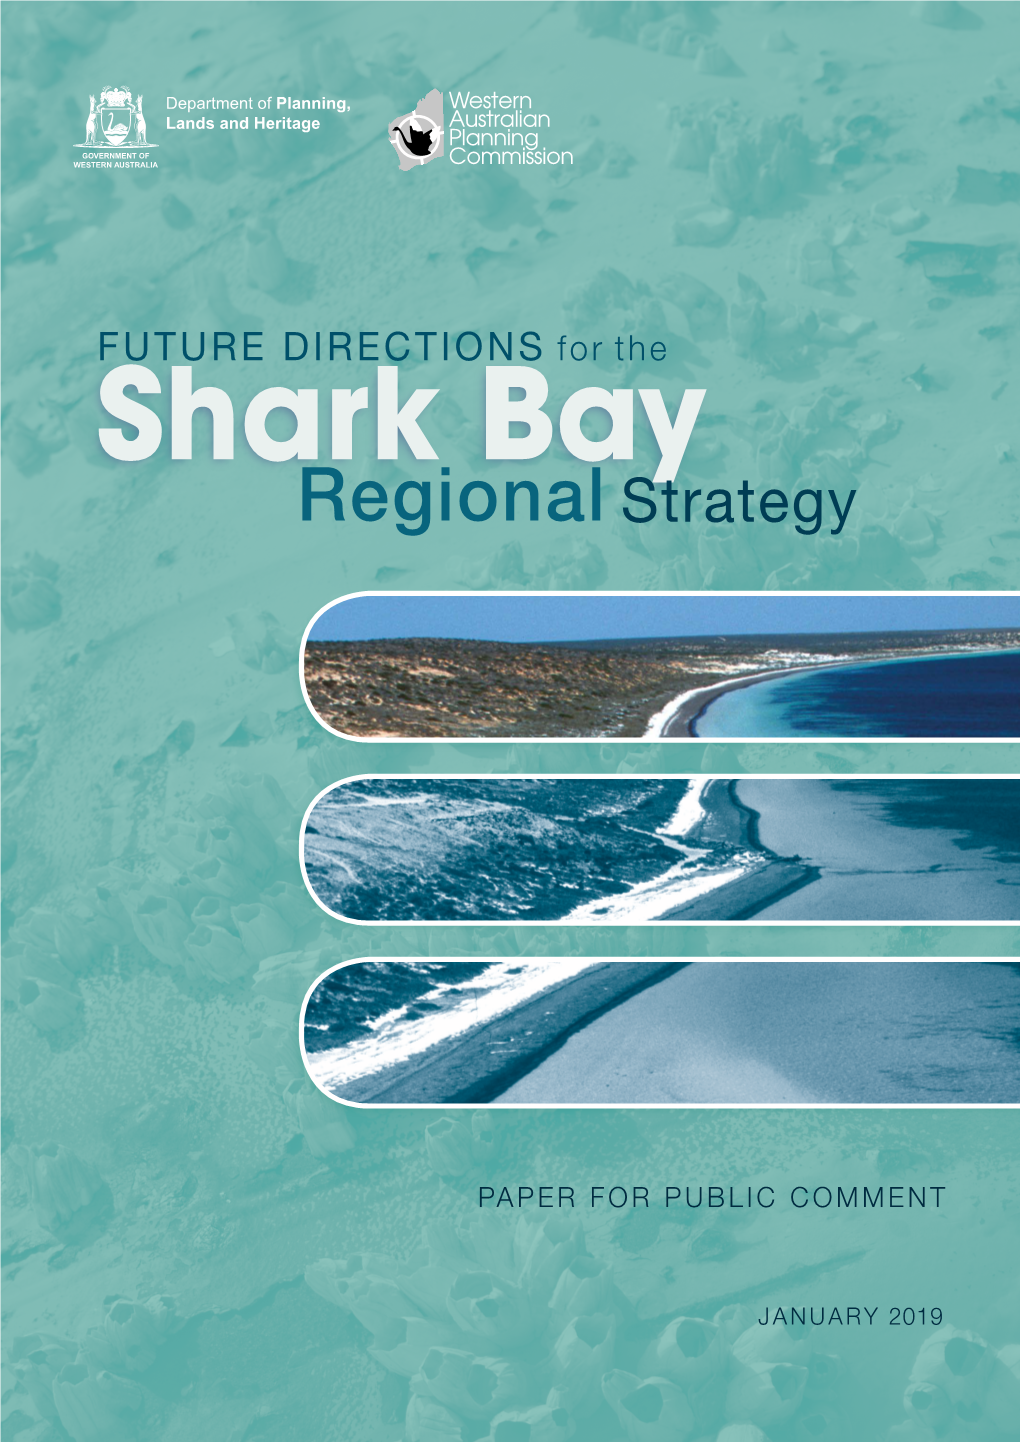 FUTURE DIRECTIONS for the Shark Bay Regional Strategy